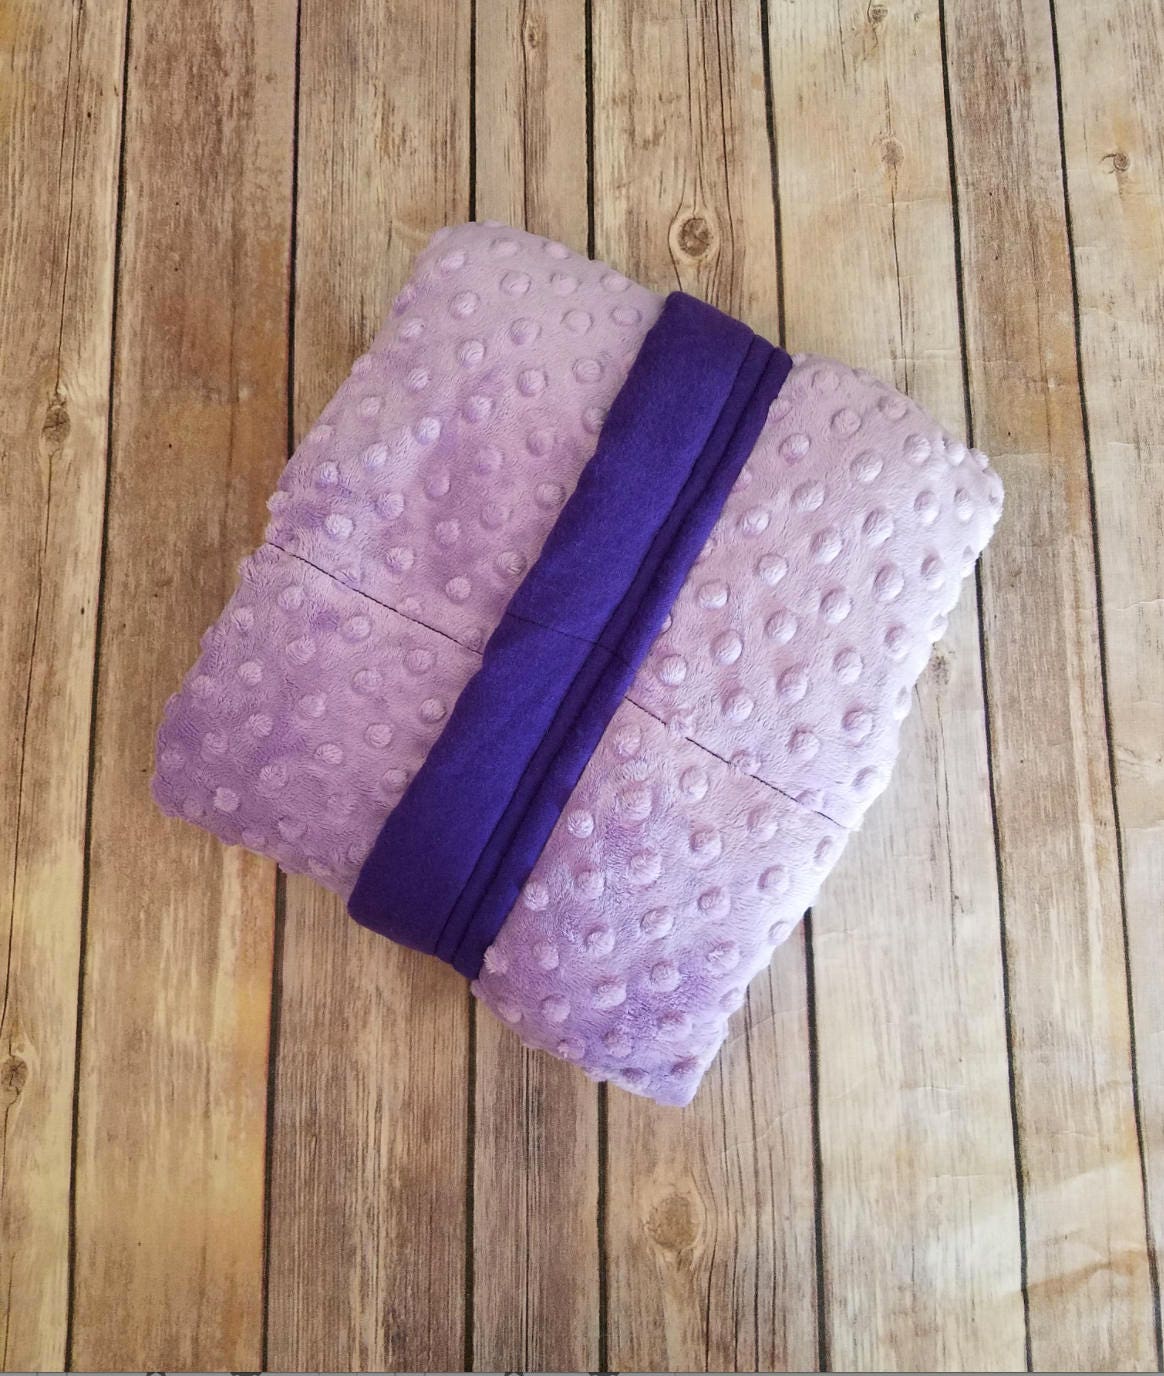 Minky, 5 Pound, WEIGHTED BLANKET, Ready To Ship, 5 pounds, 28x32, for